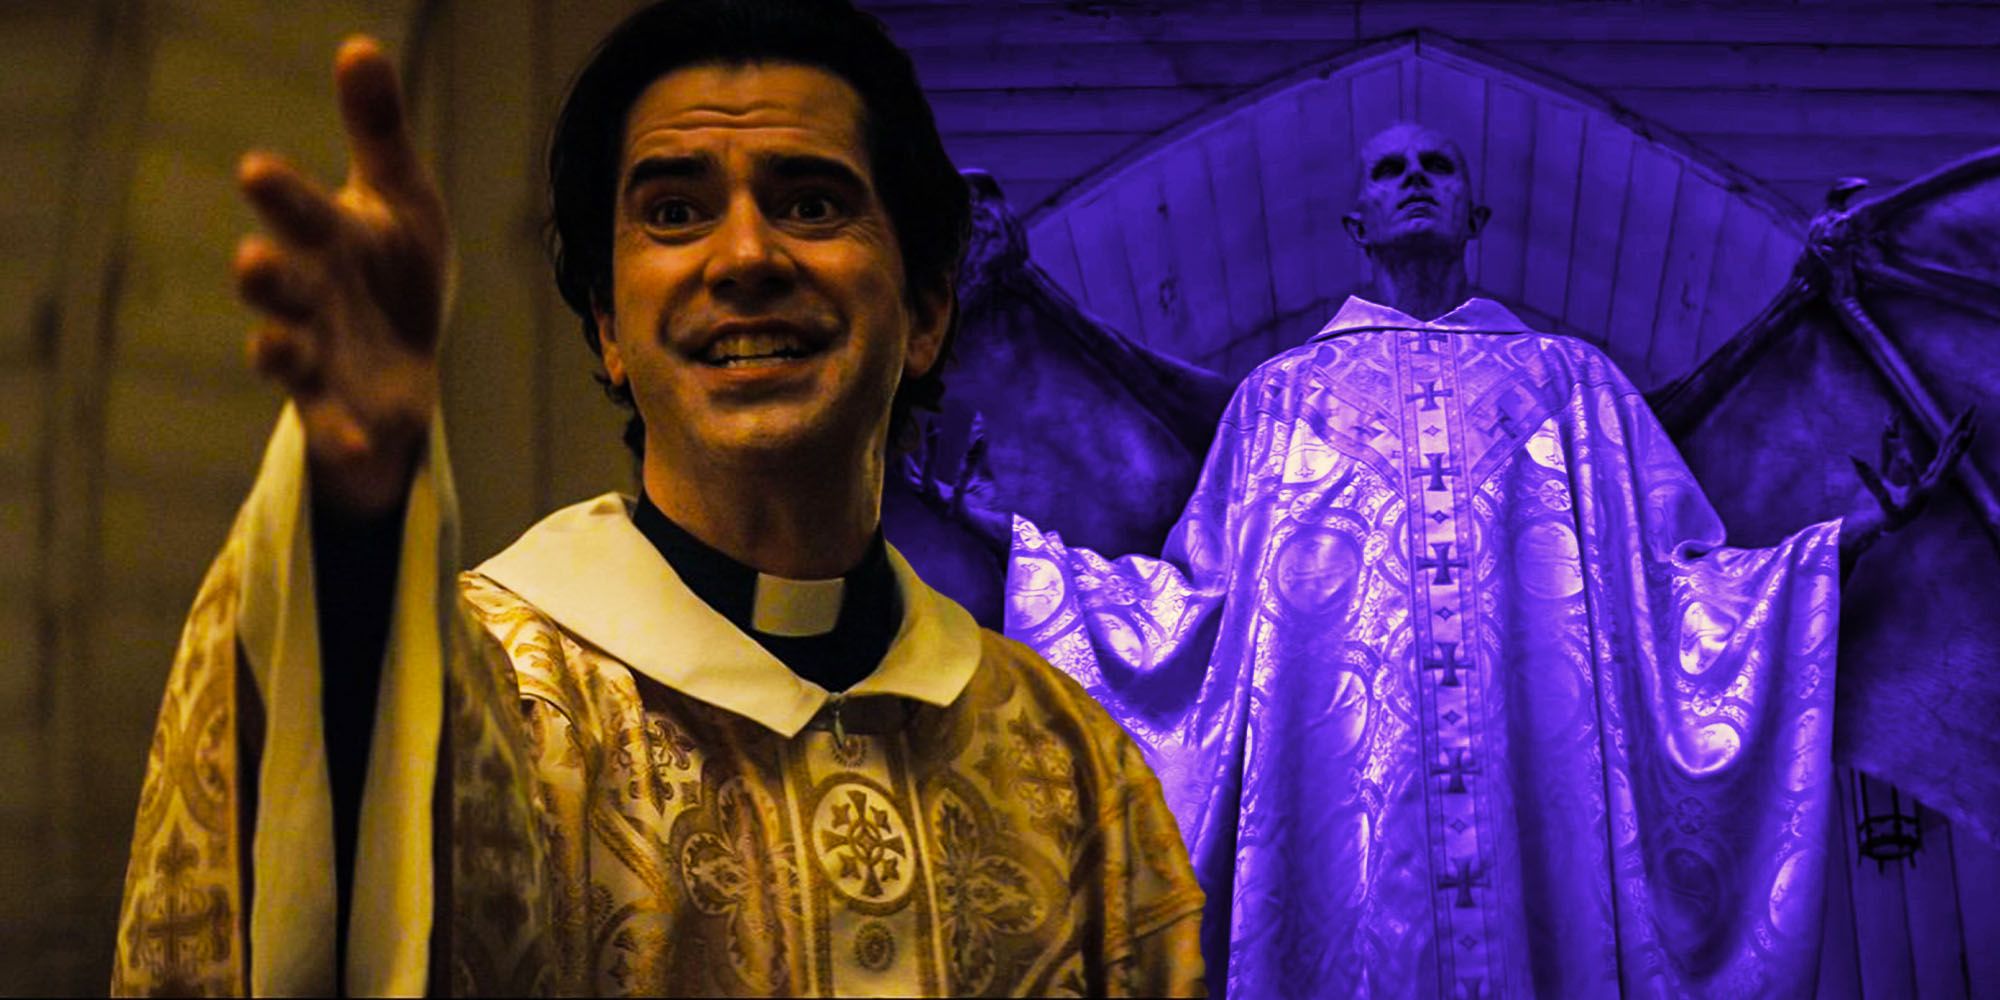 Midnight Mass detail shows why the vampires plan was brilliant holy water